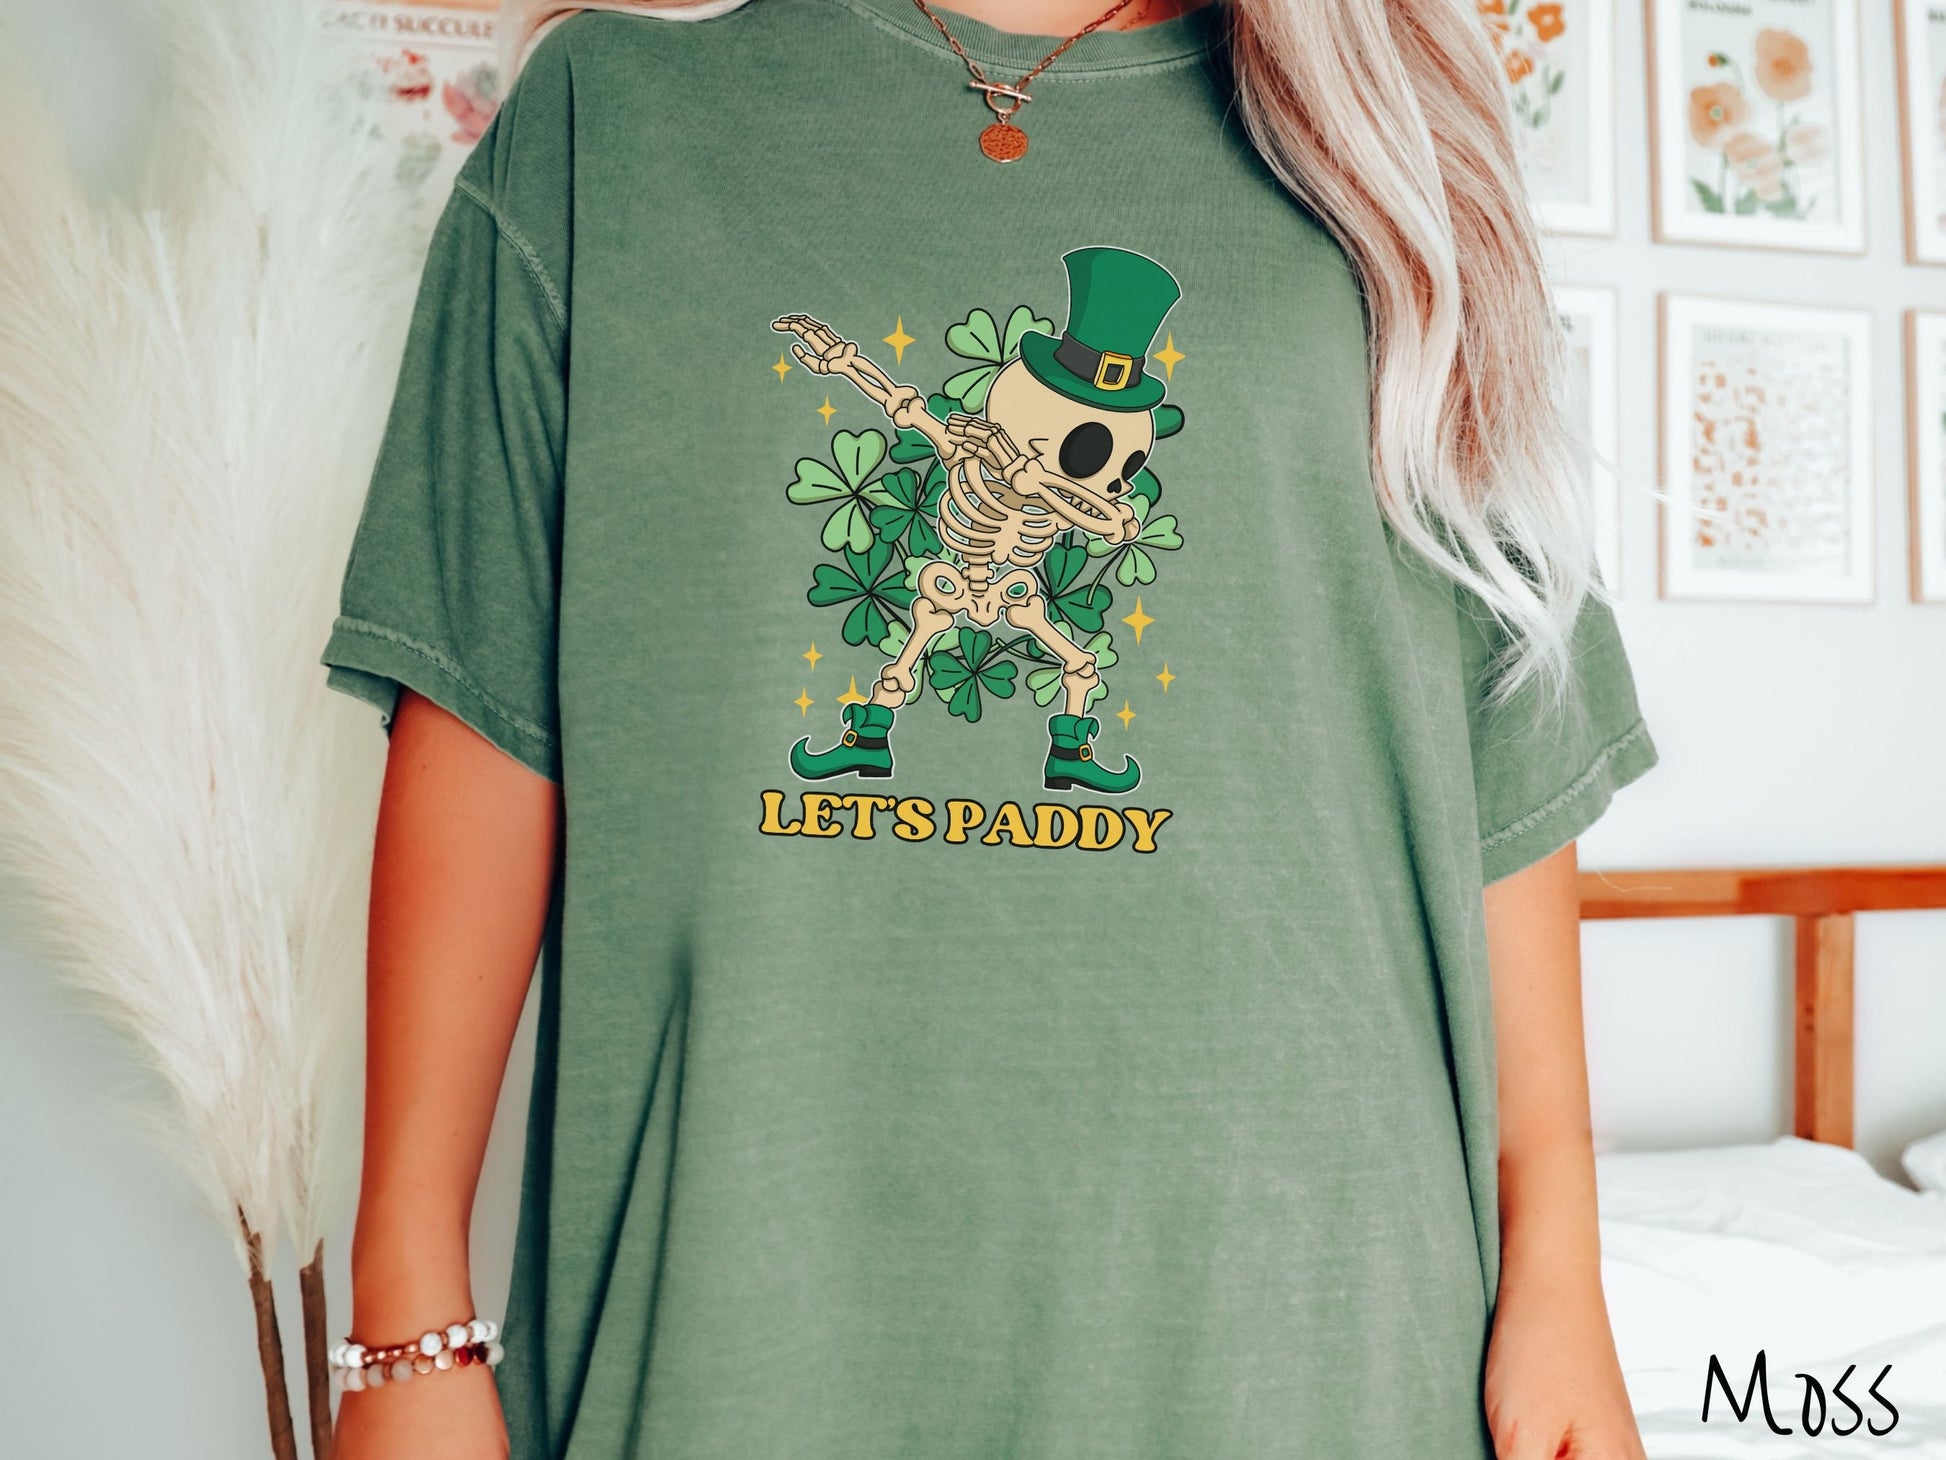 A woman wearing a vintage, moss colored shirt with the text Lets Paddy and below that is a leprechaun wearing a green top hat and green elf shoes doing the dab dance and there are green clovers and golden stars in the background.